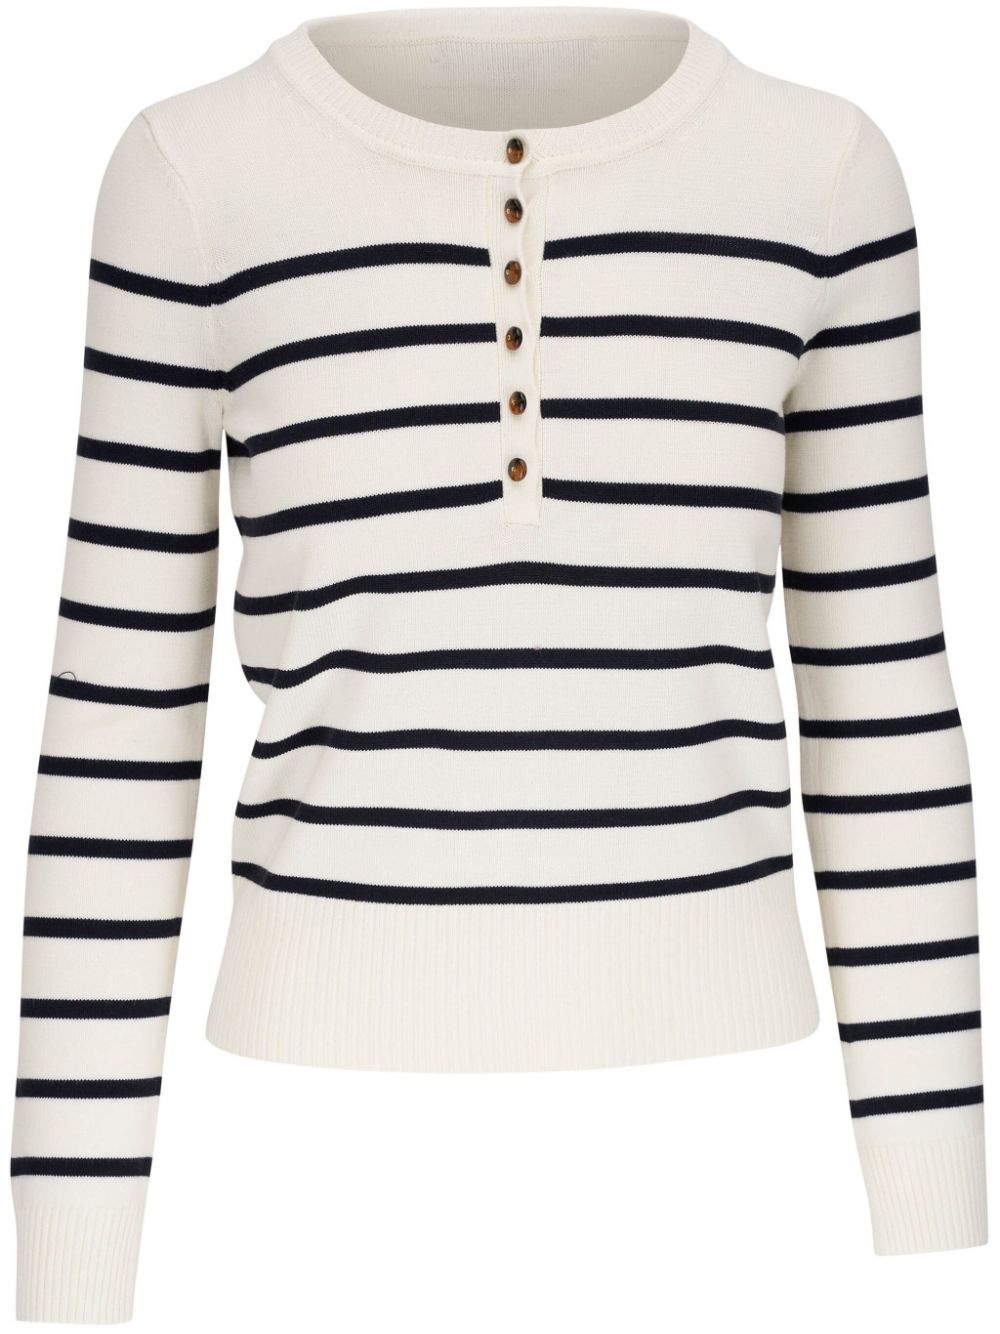 Dianora striped knitted top - 1